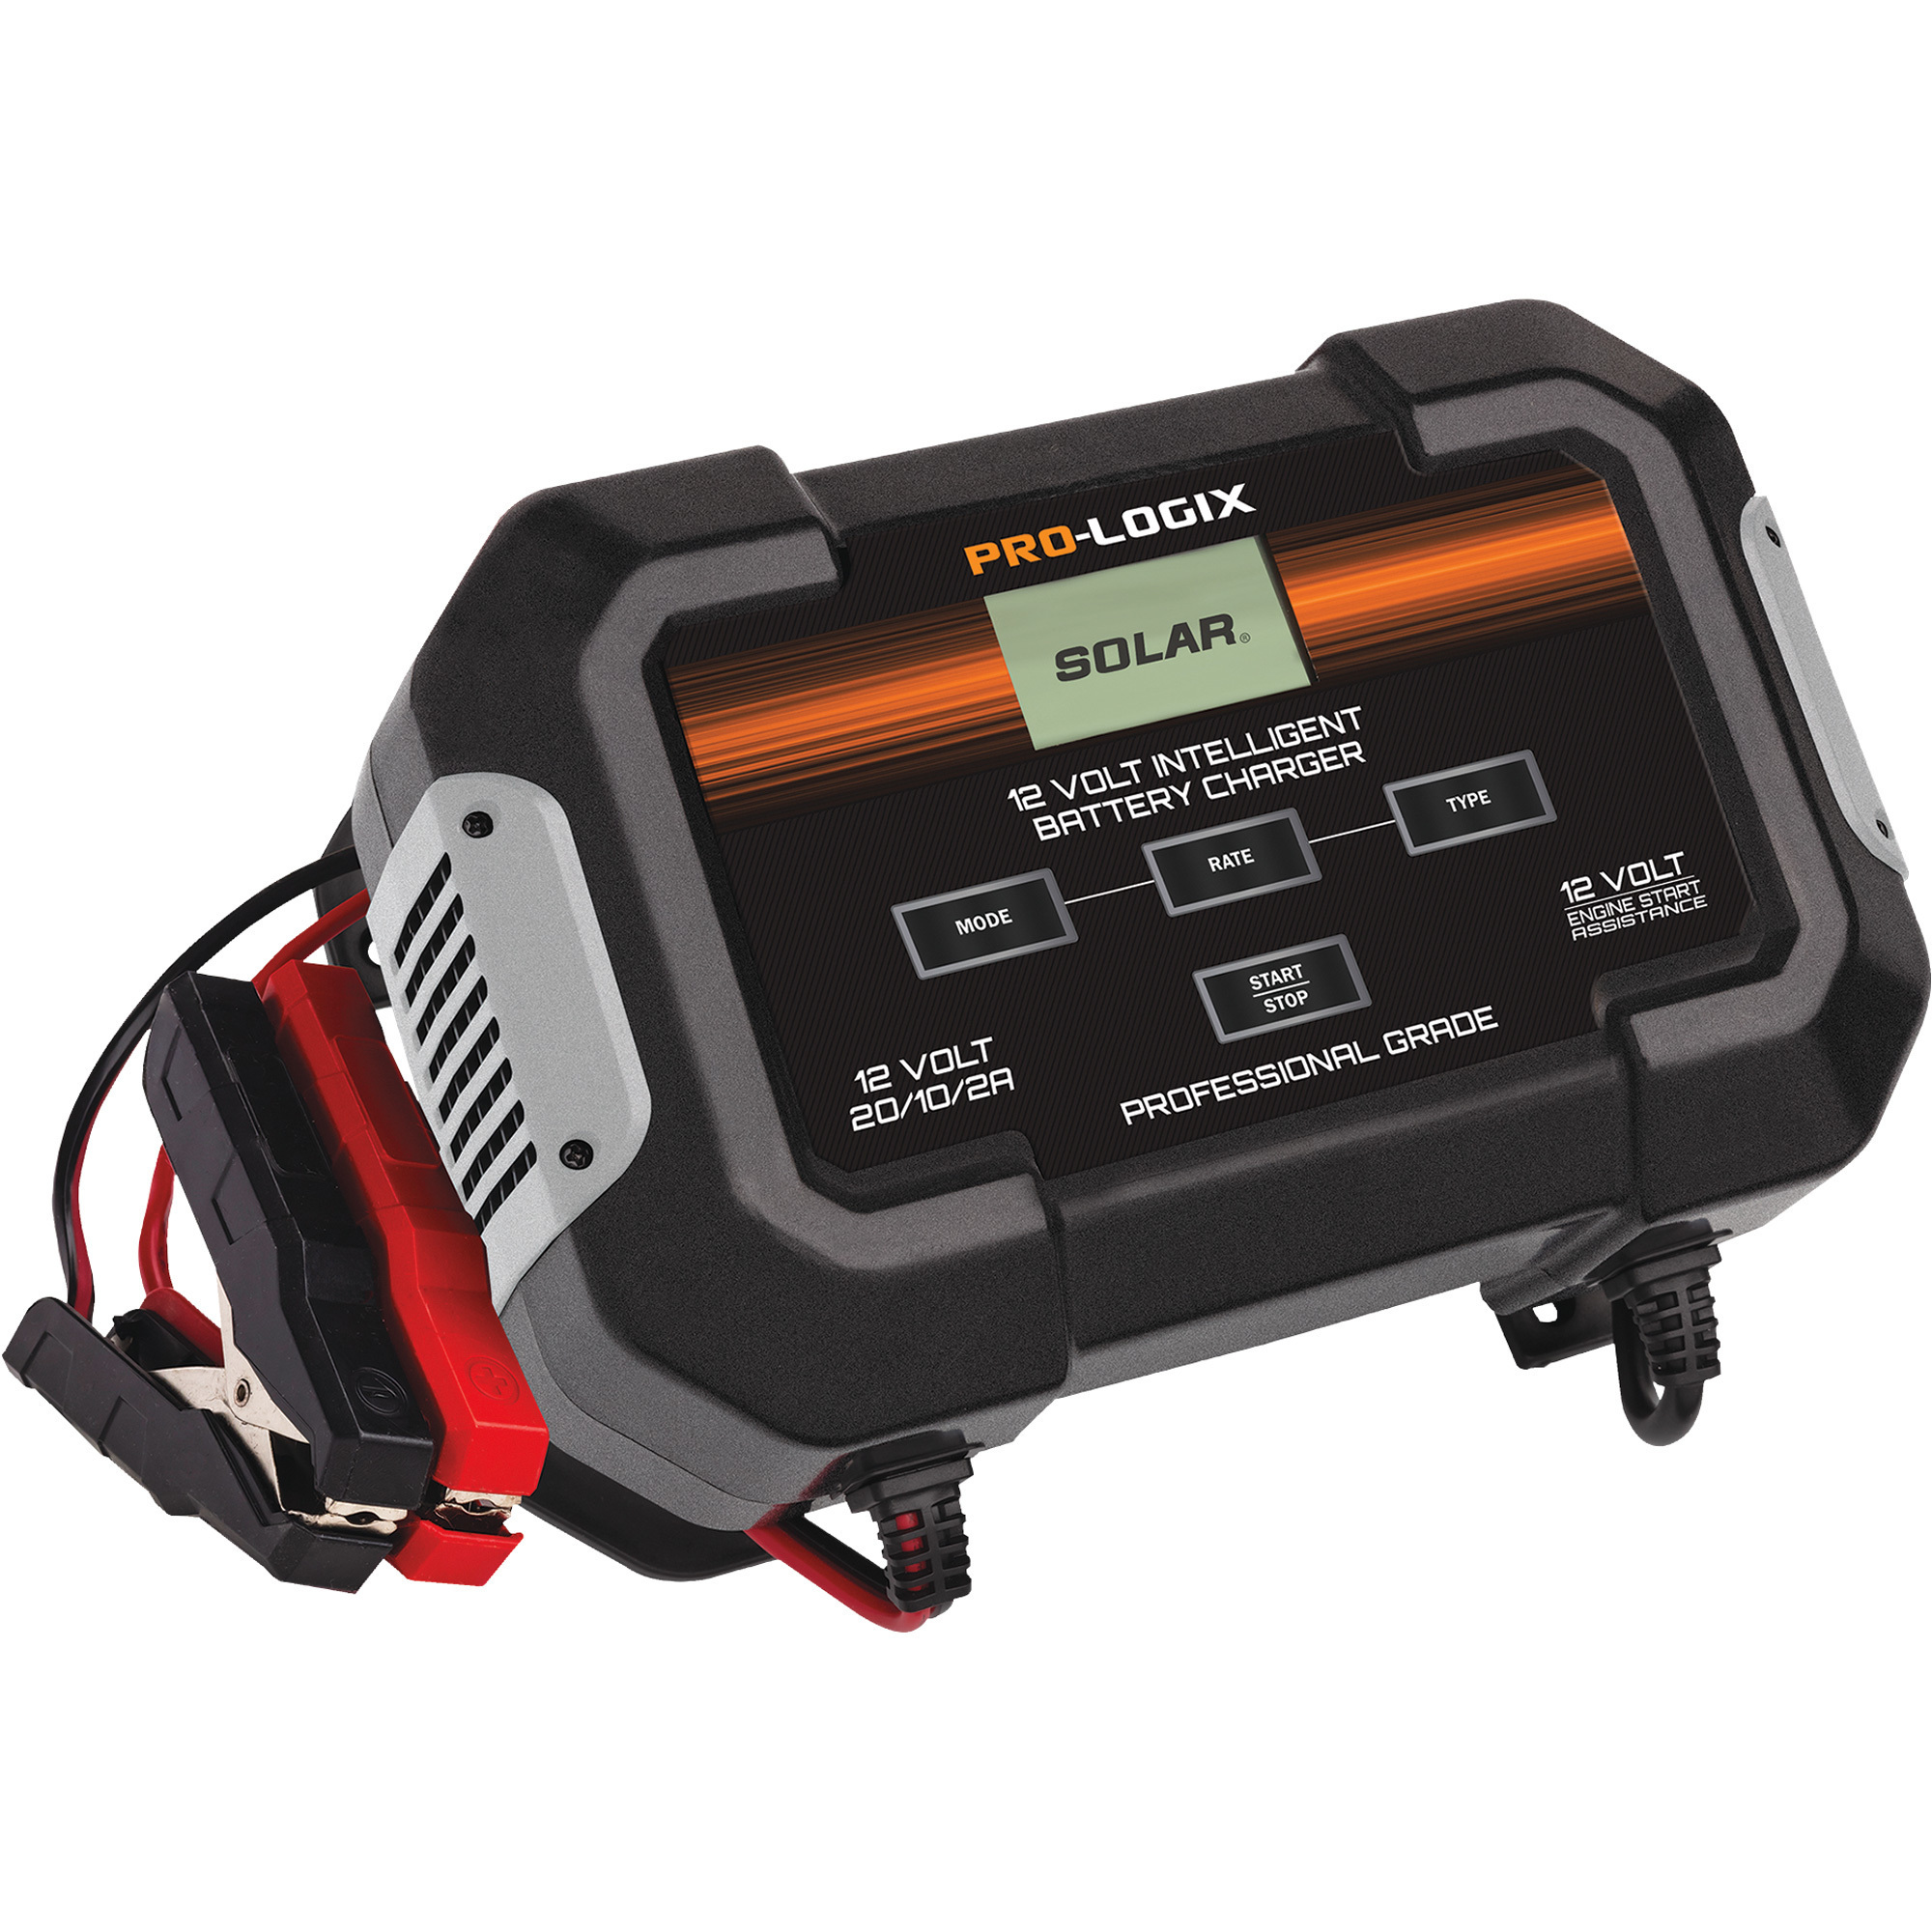 Pro-Logix Intelligent Battery Charger/Maintainer With Start Assistance, 12 Volts, 20/10/2 Amps, Model PL2545